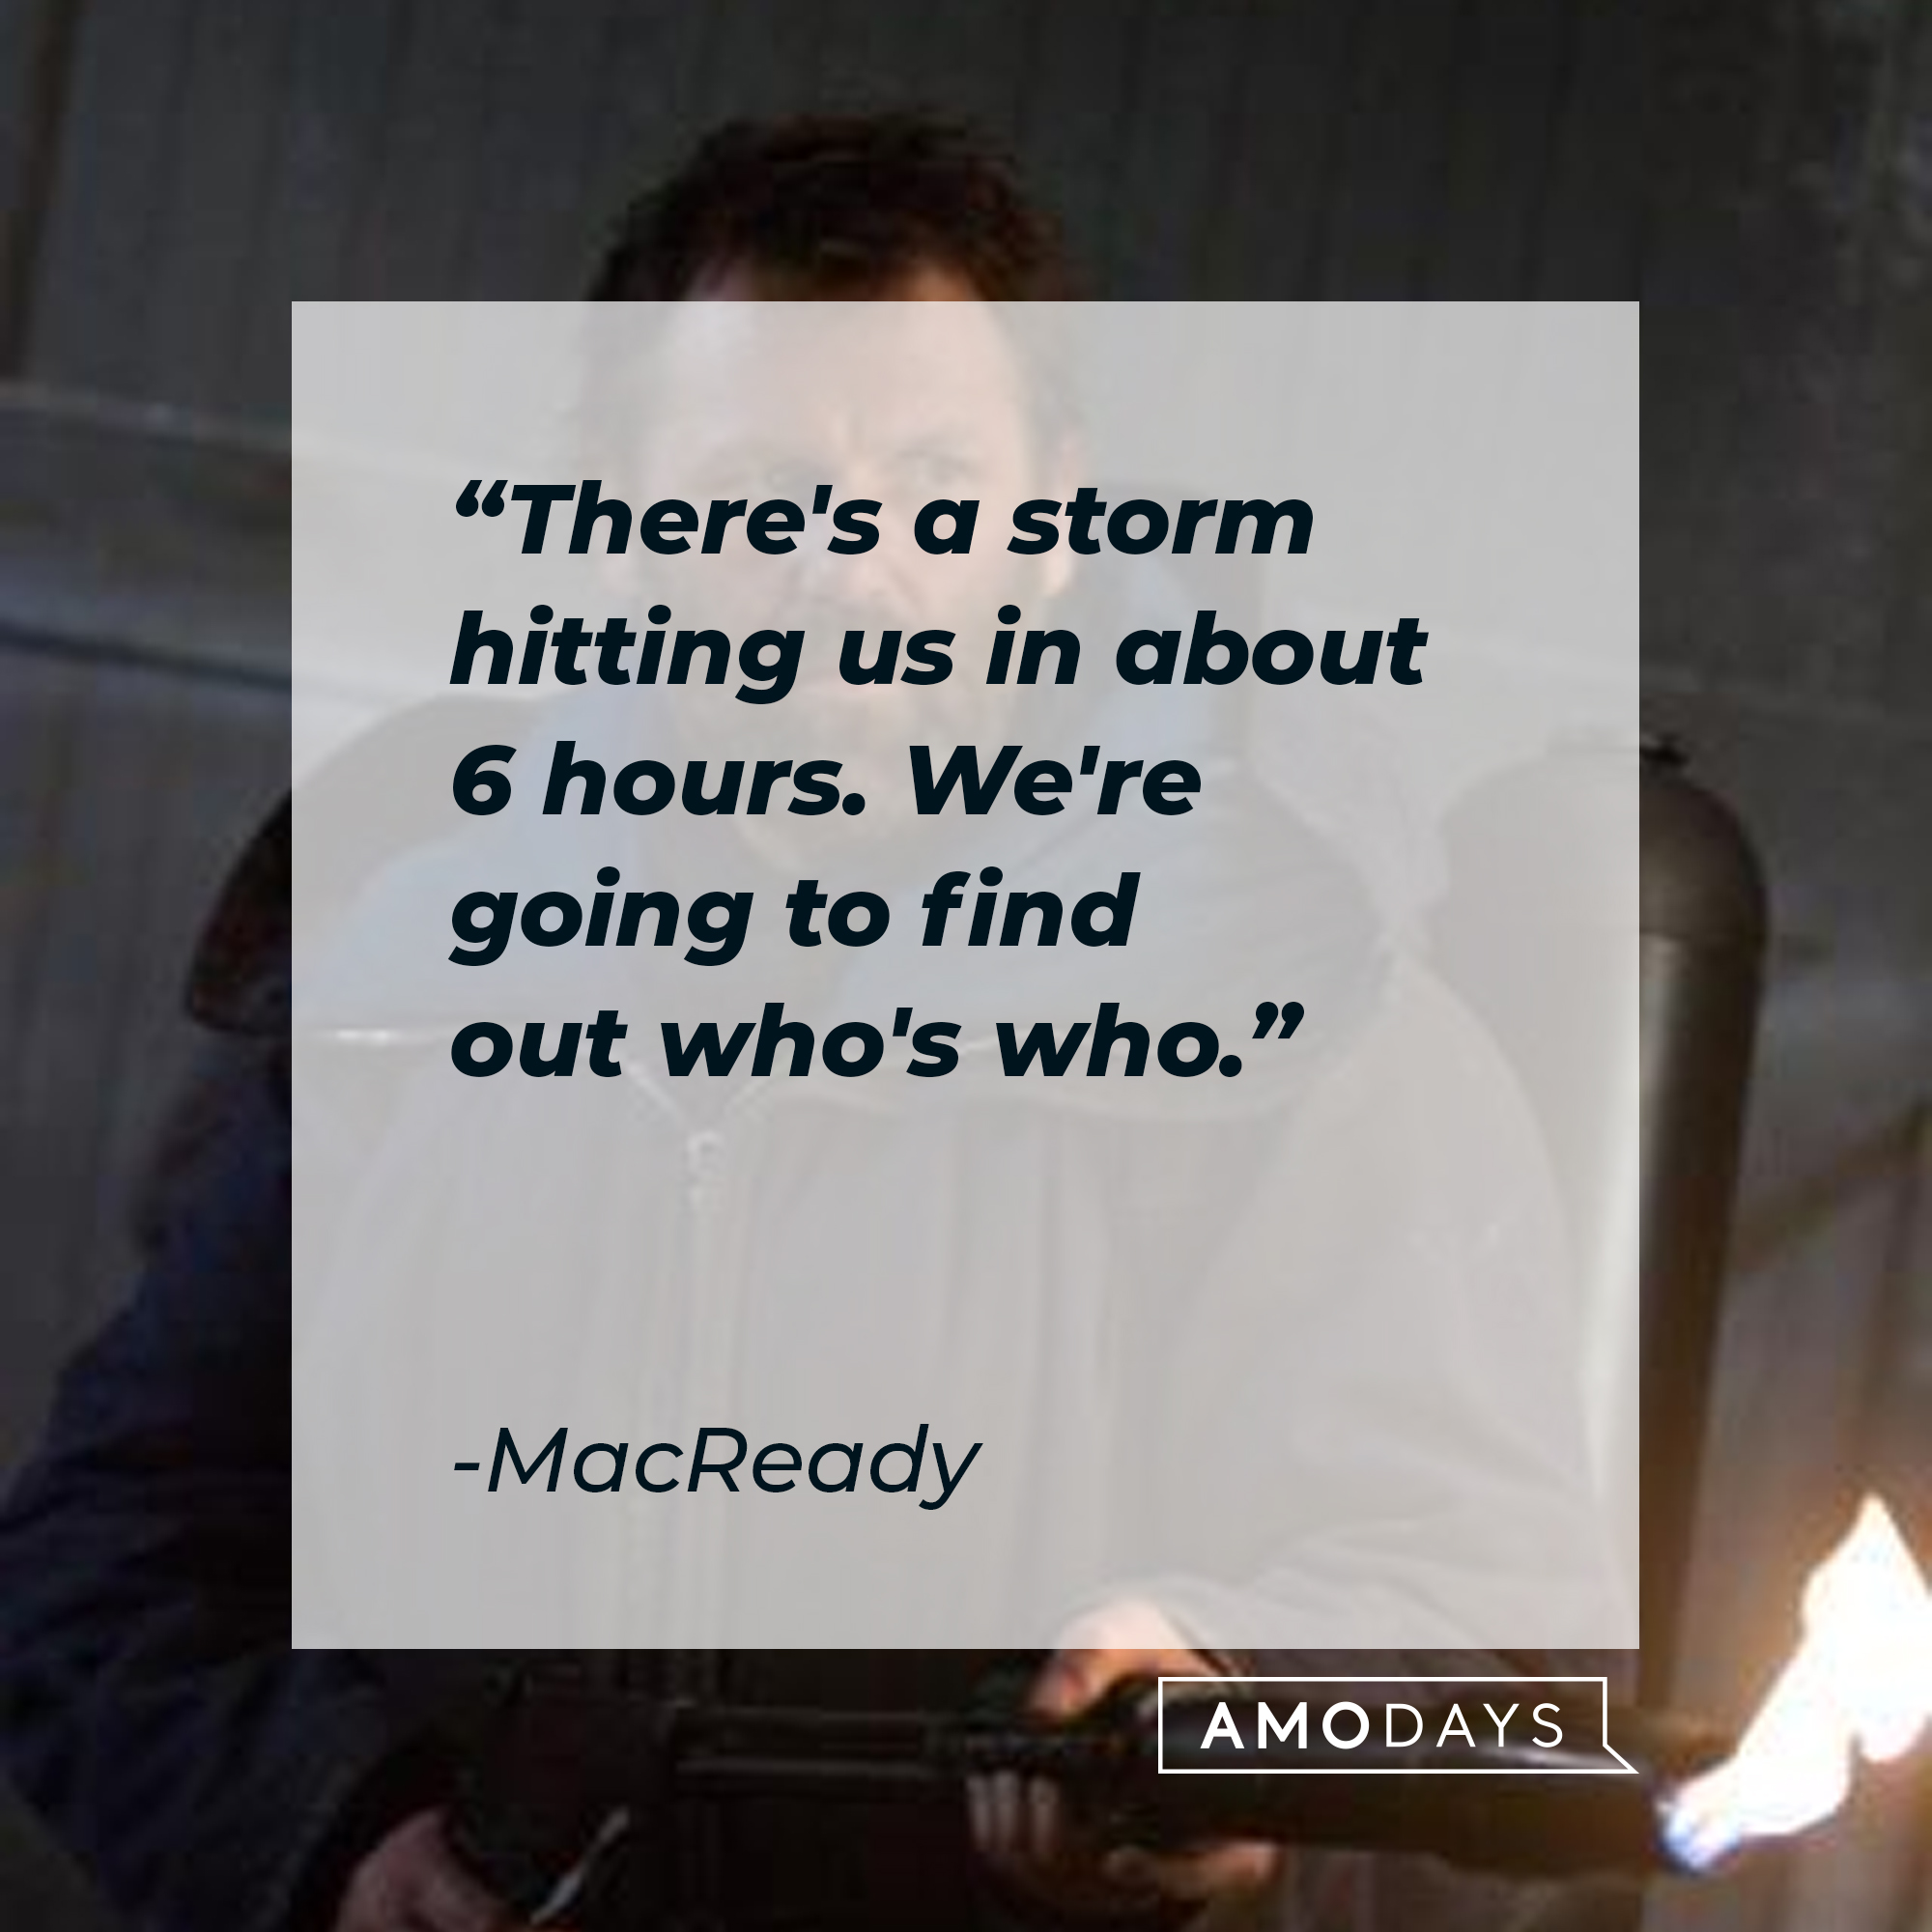 MacReady's quote: "There's a storm hitting us in about 6 hours. We're going to find out who's who." | Source: facebook.com/thethingmovie